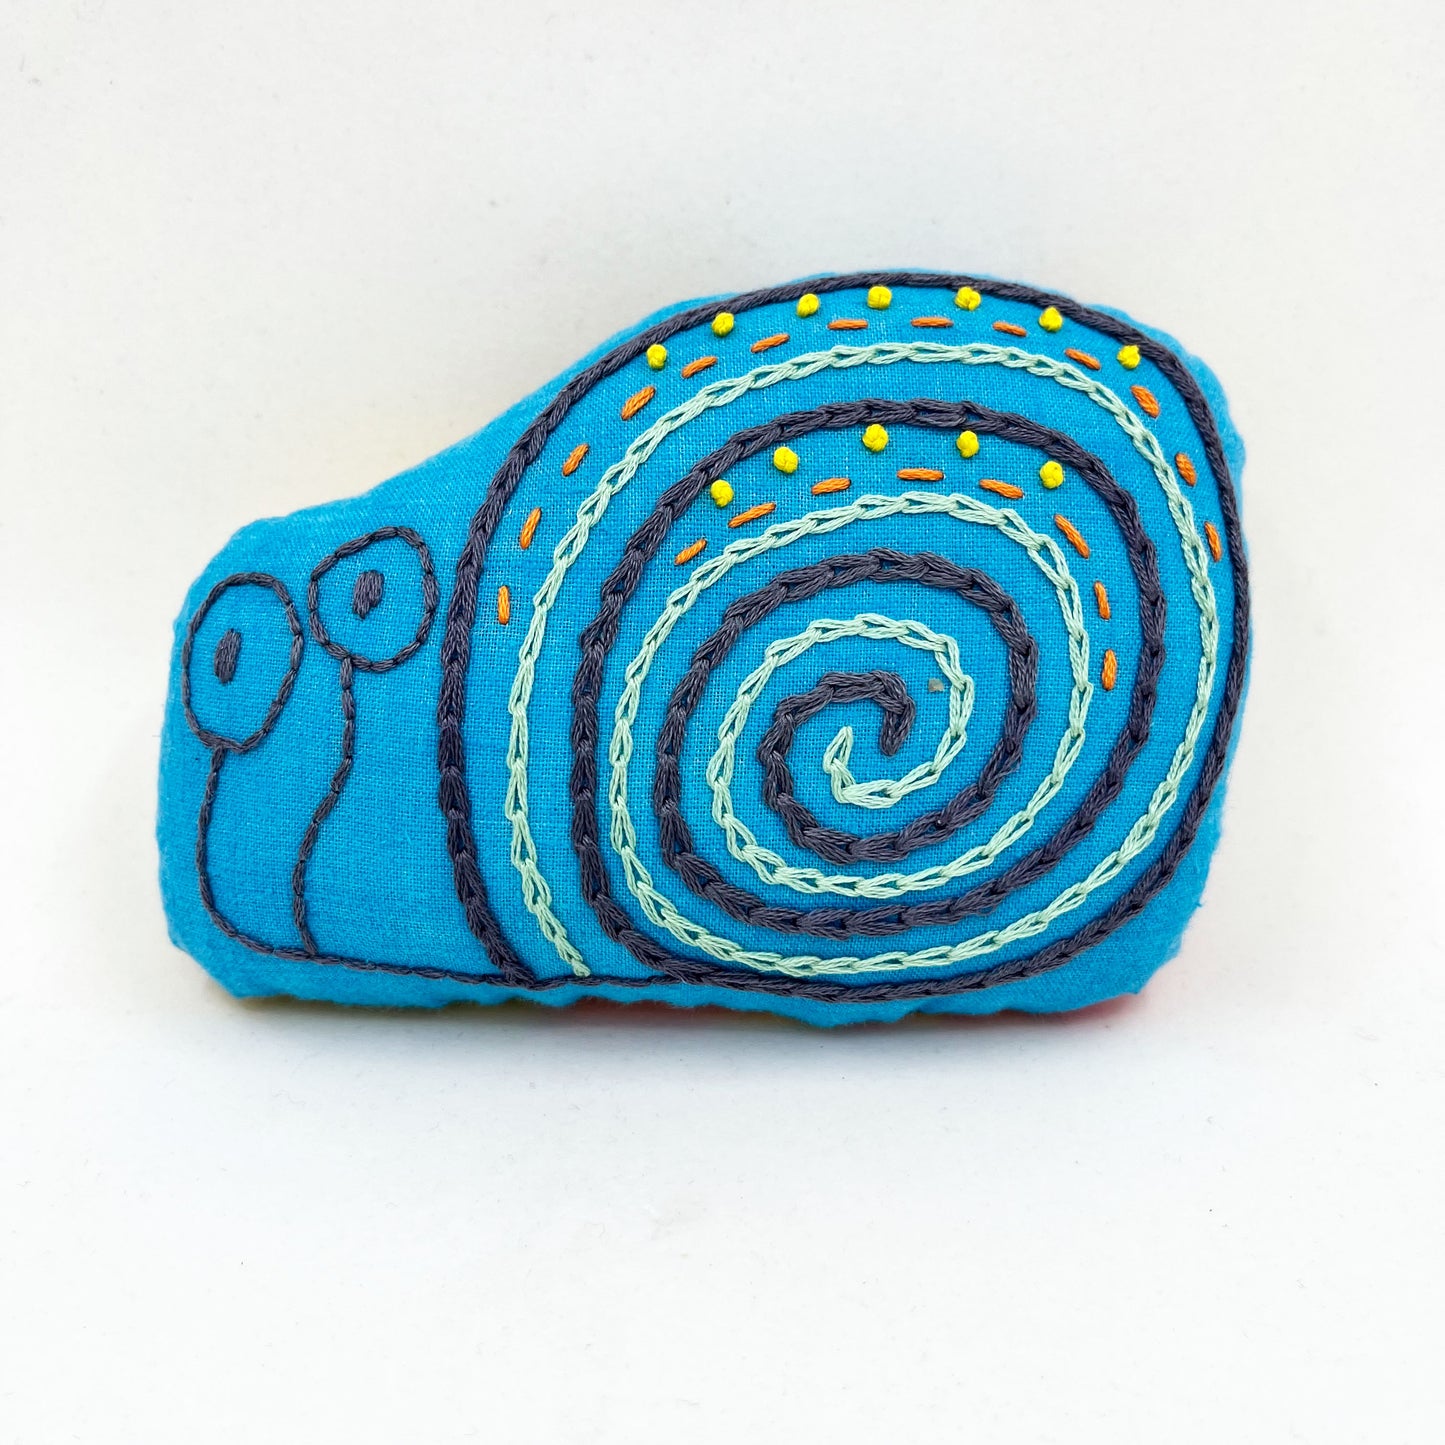 a colorfully hand embroidered stuffed pillow animal of a snail in blue fabric on a white background